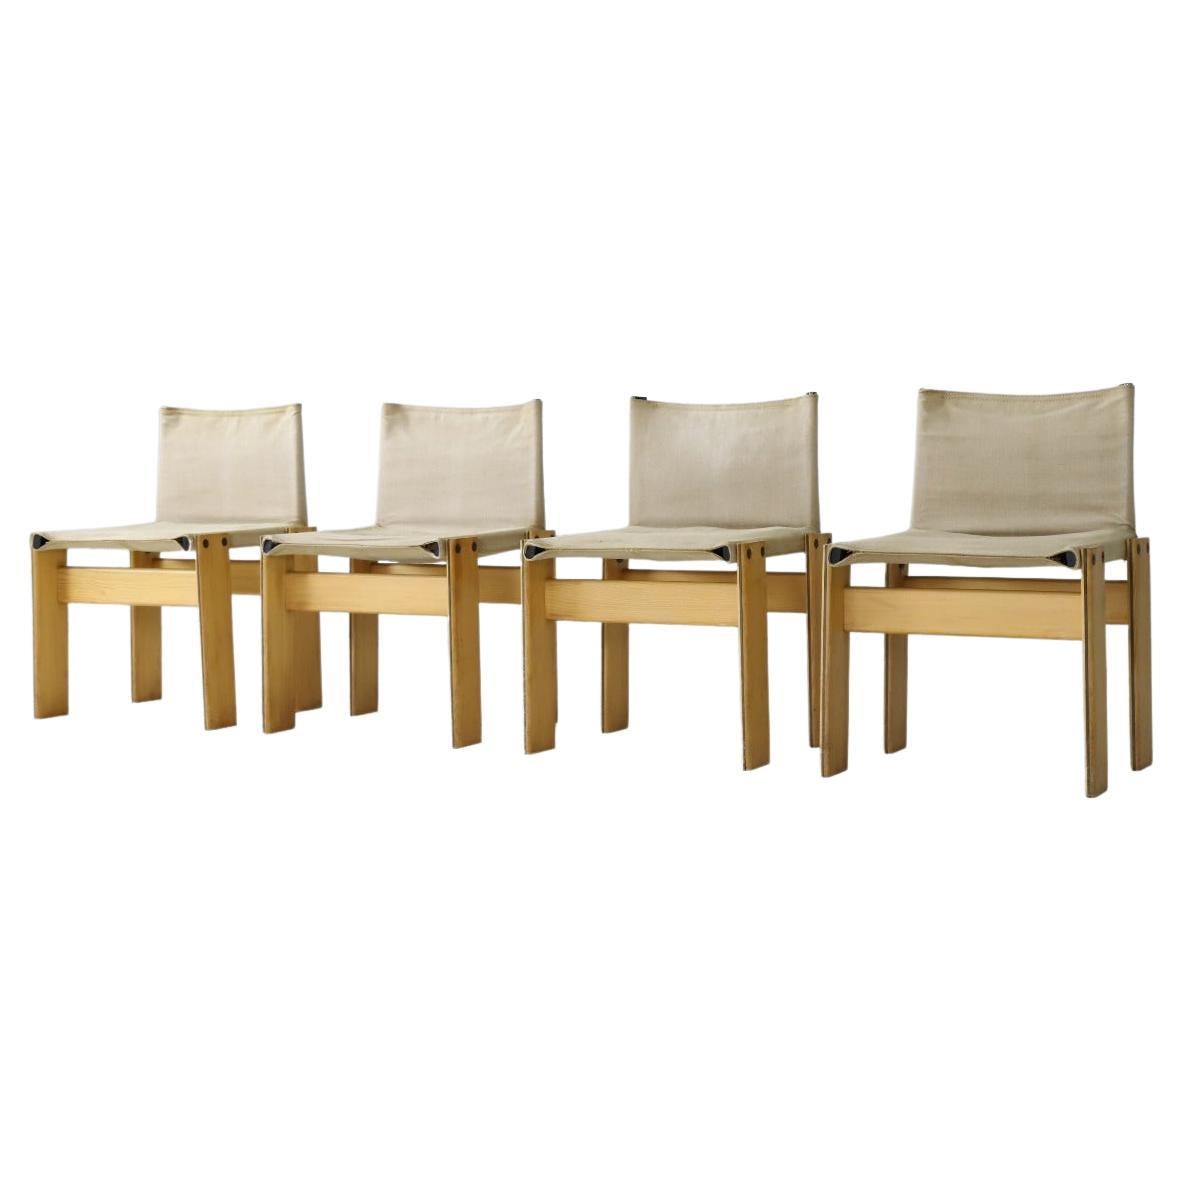 Set of 4 'Monk' Chairs by Afra & Tobia Scarpa for Molteni, Italy, 1974